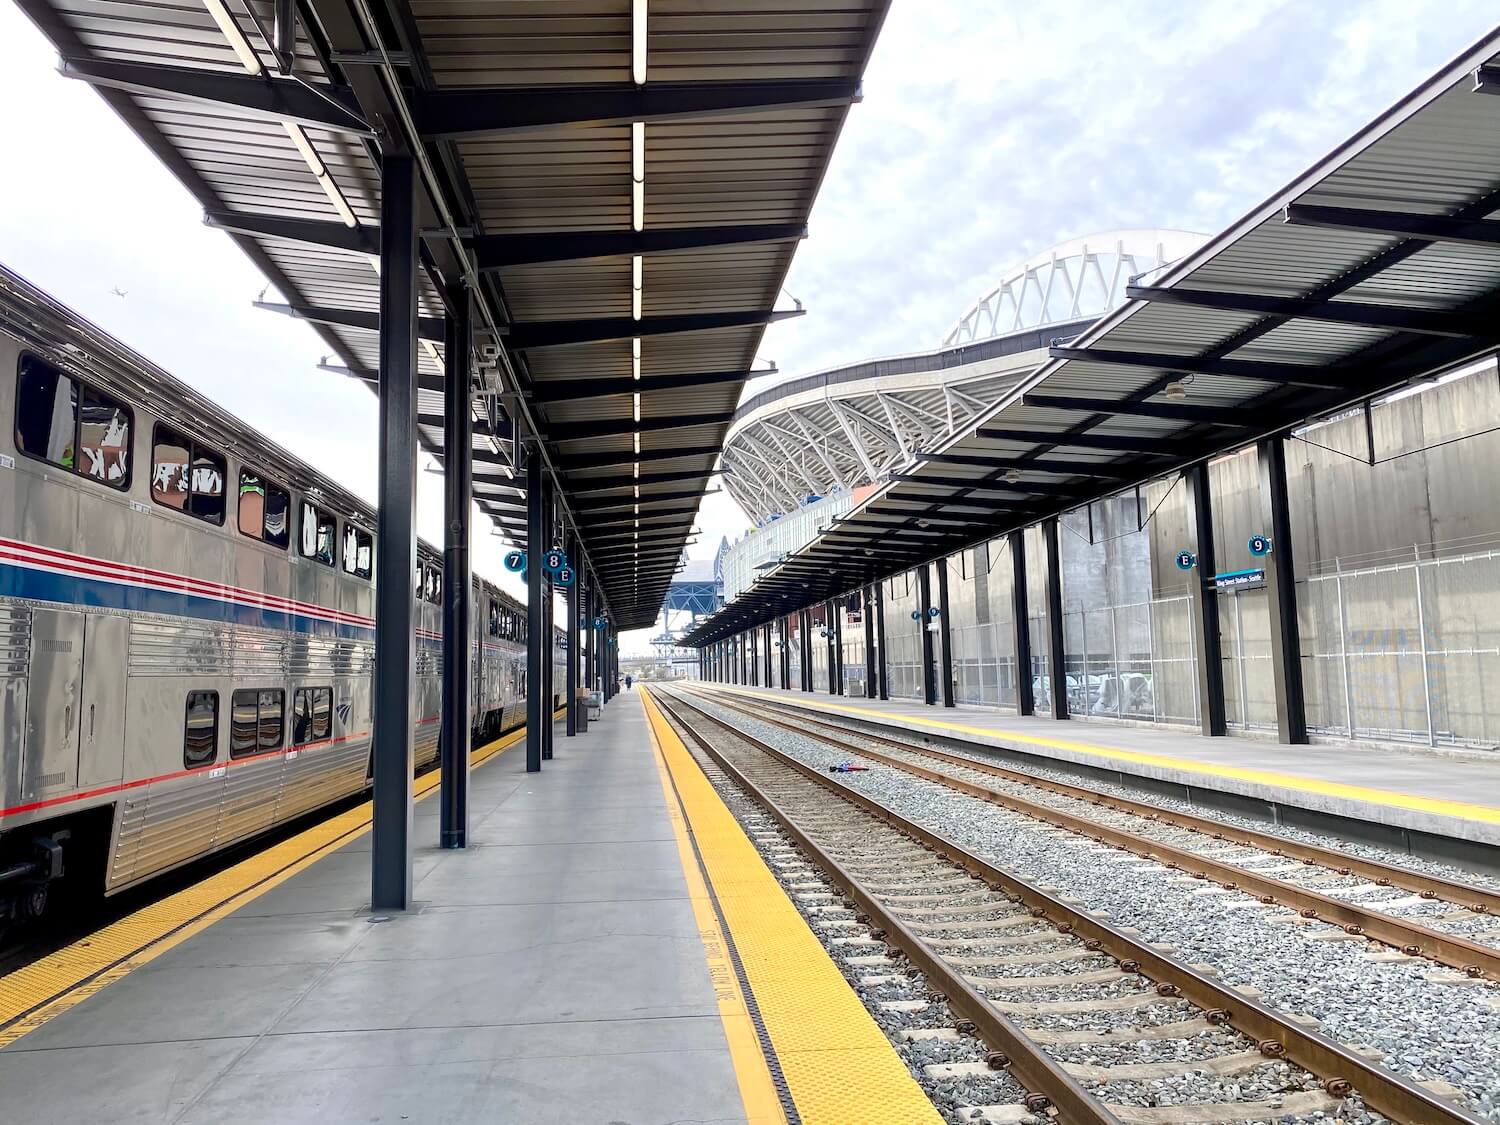 The Seattle King Street Station is the terminus for the train to Vancouver. Here, yellow warning lines remind travelers to stay away from the tracks, which are shown leading away from the station.